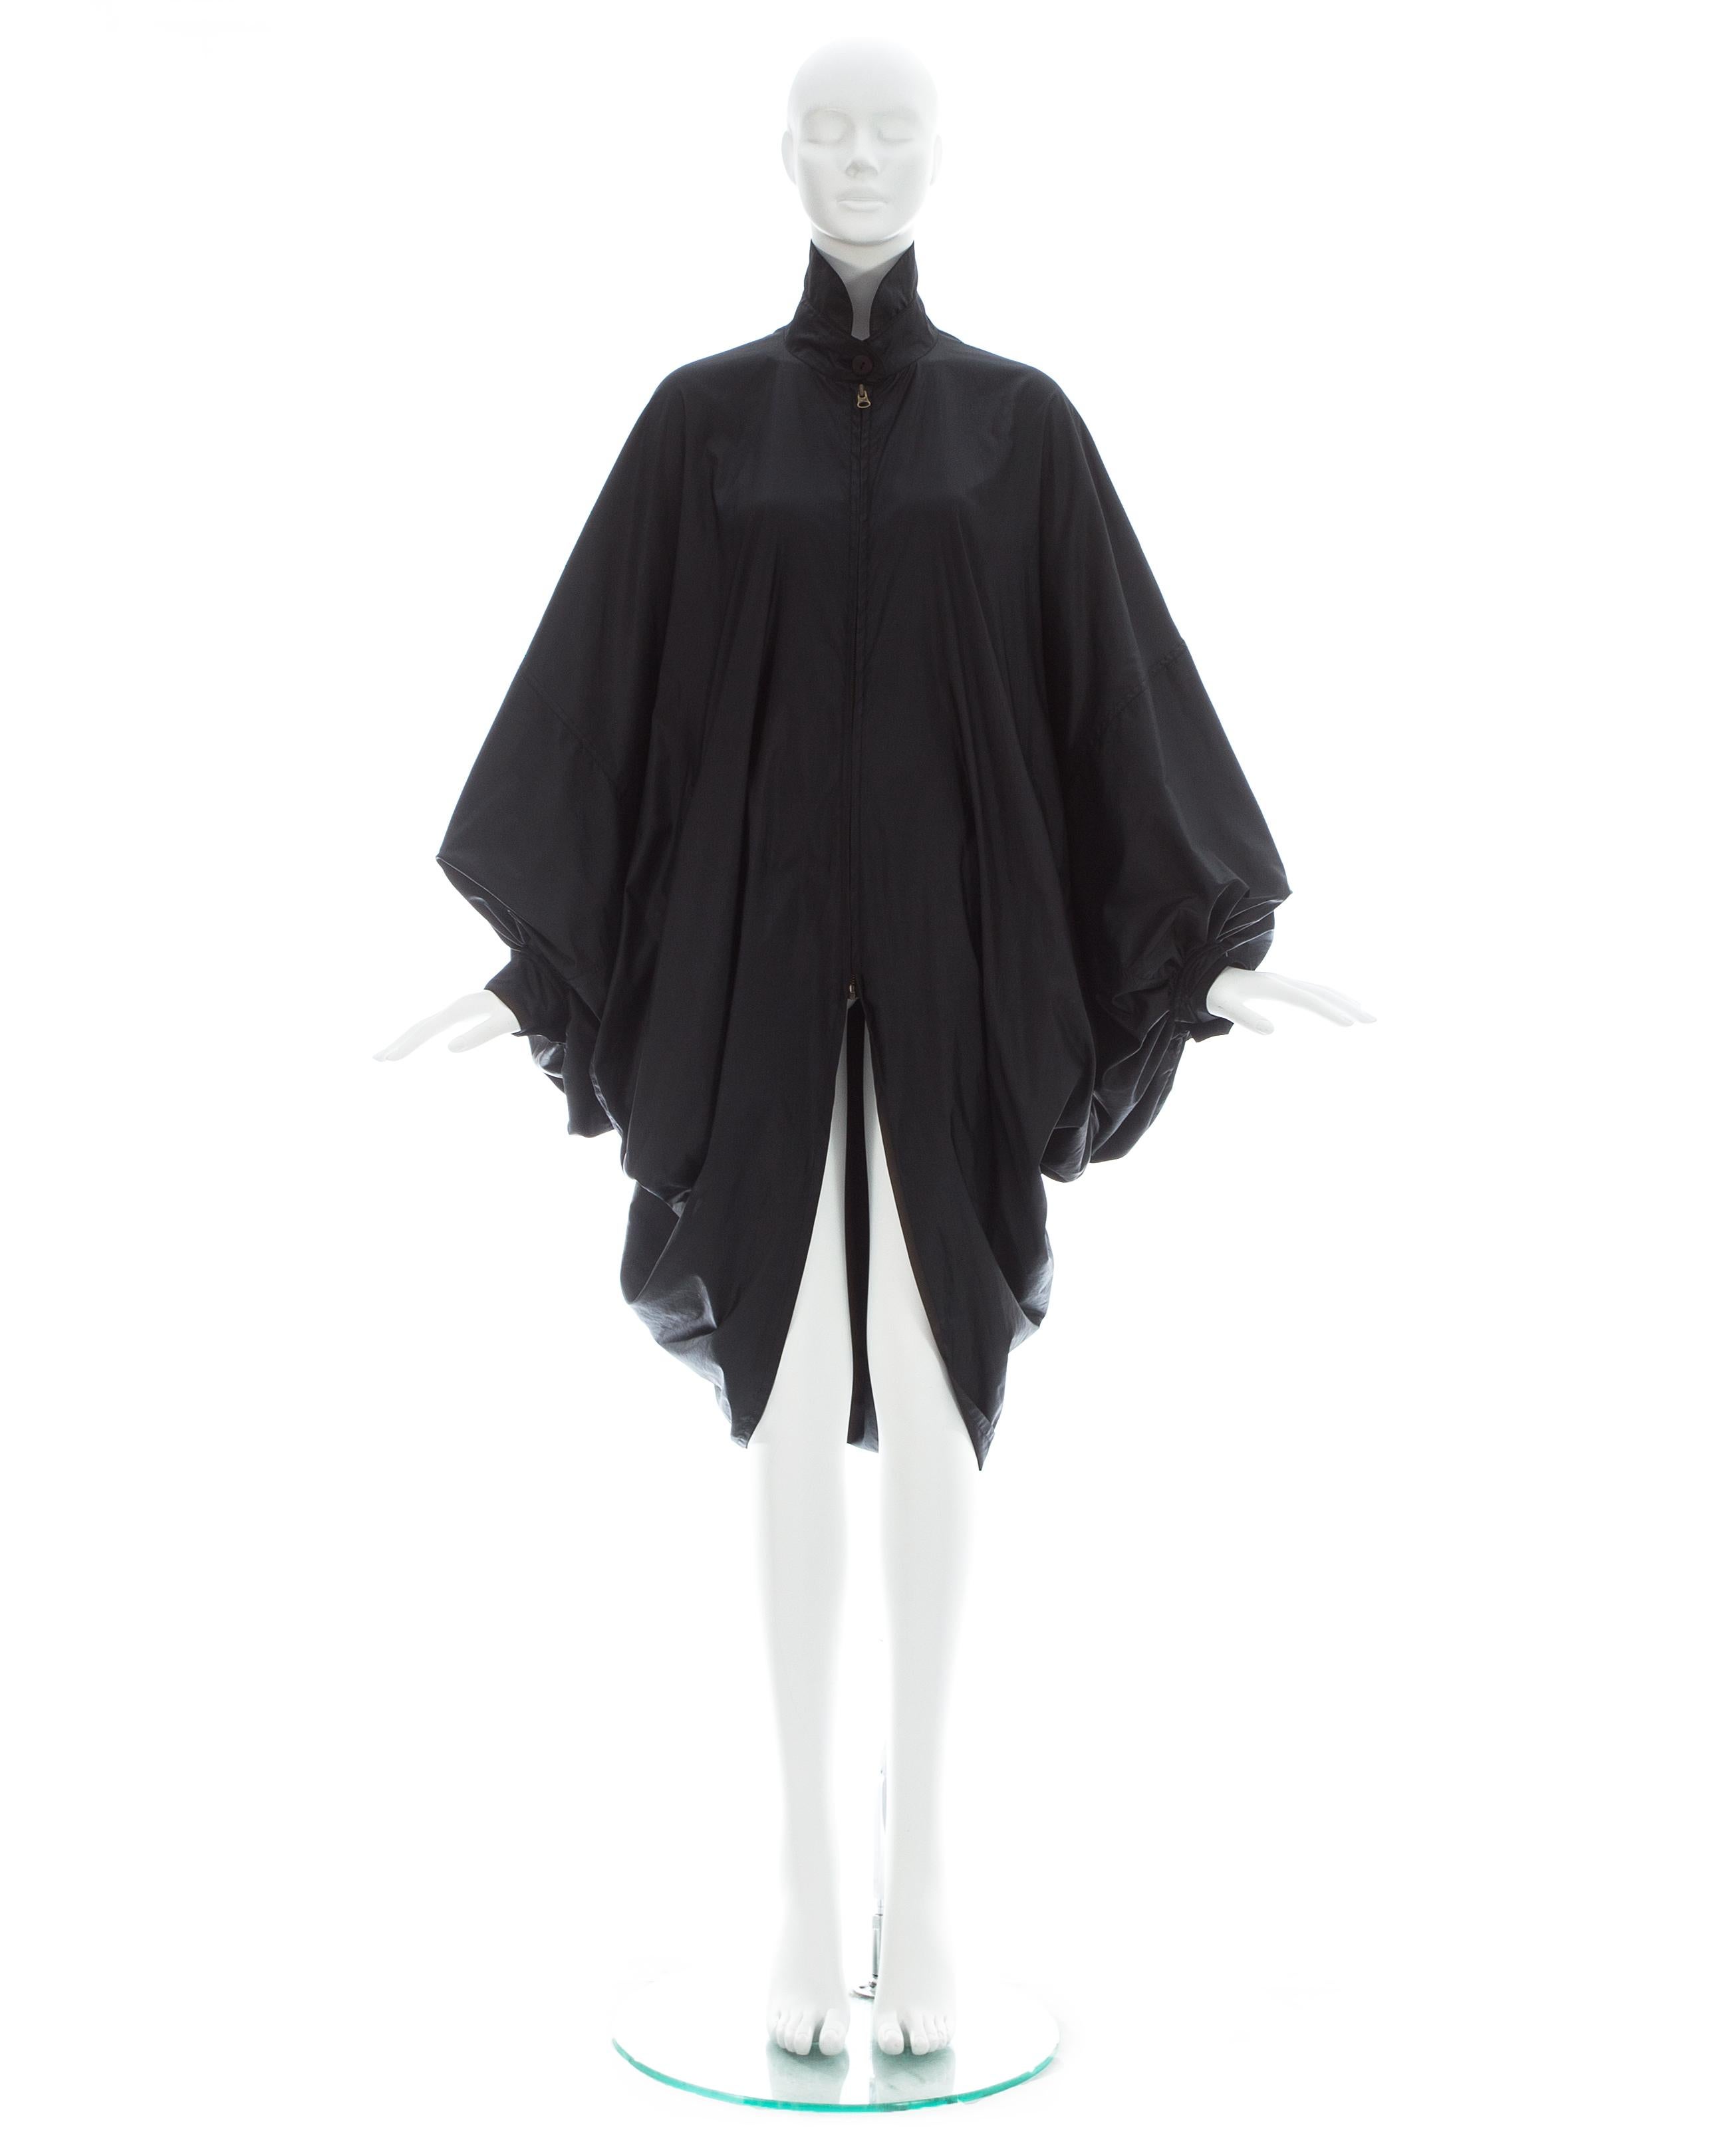 Issey Miyake; Black nylon oversized parachute coat with batwing sleeves and two front pockets

Fall-Winter 1987